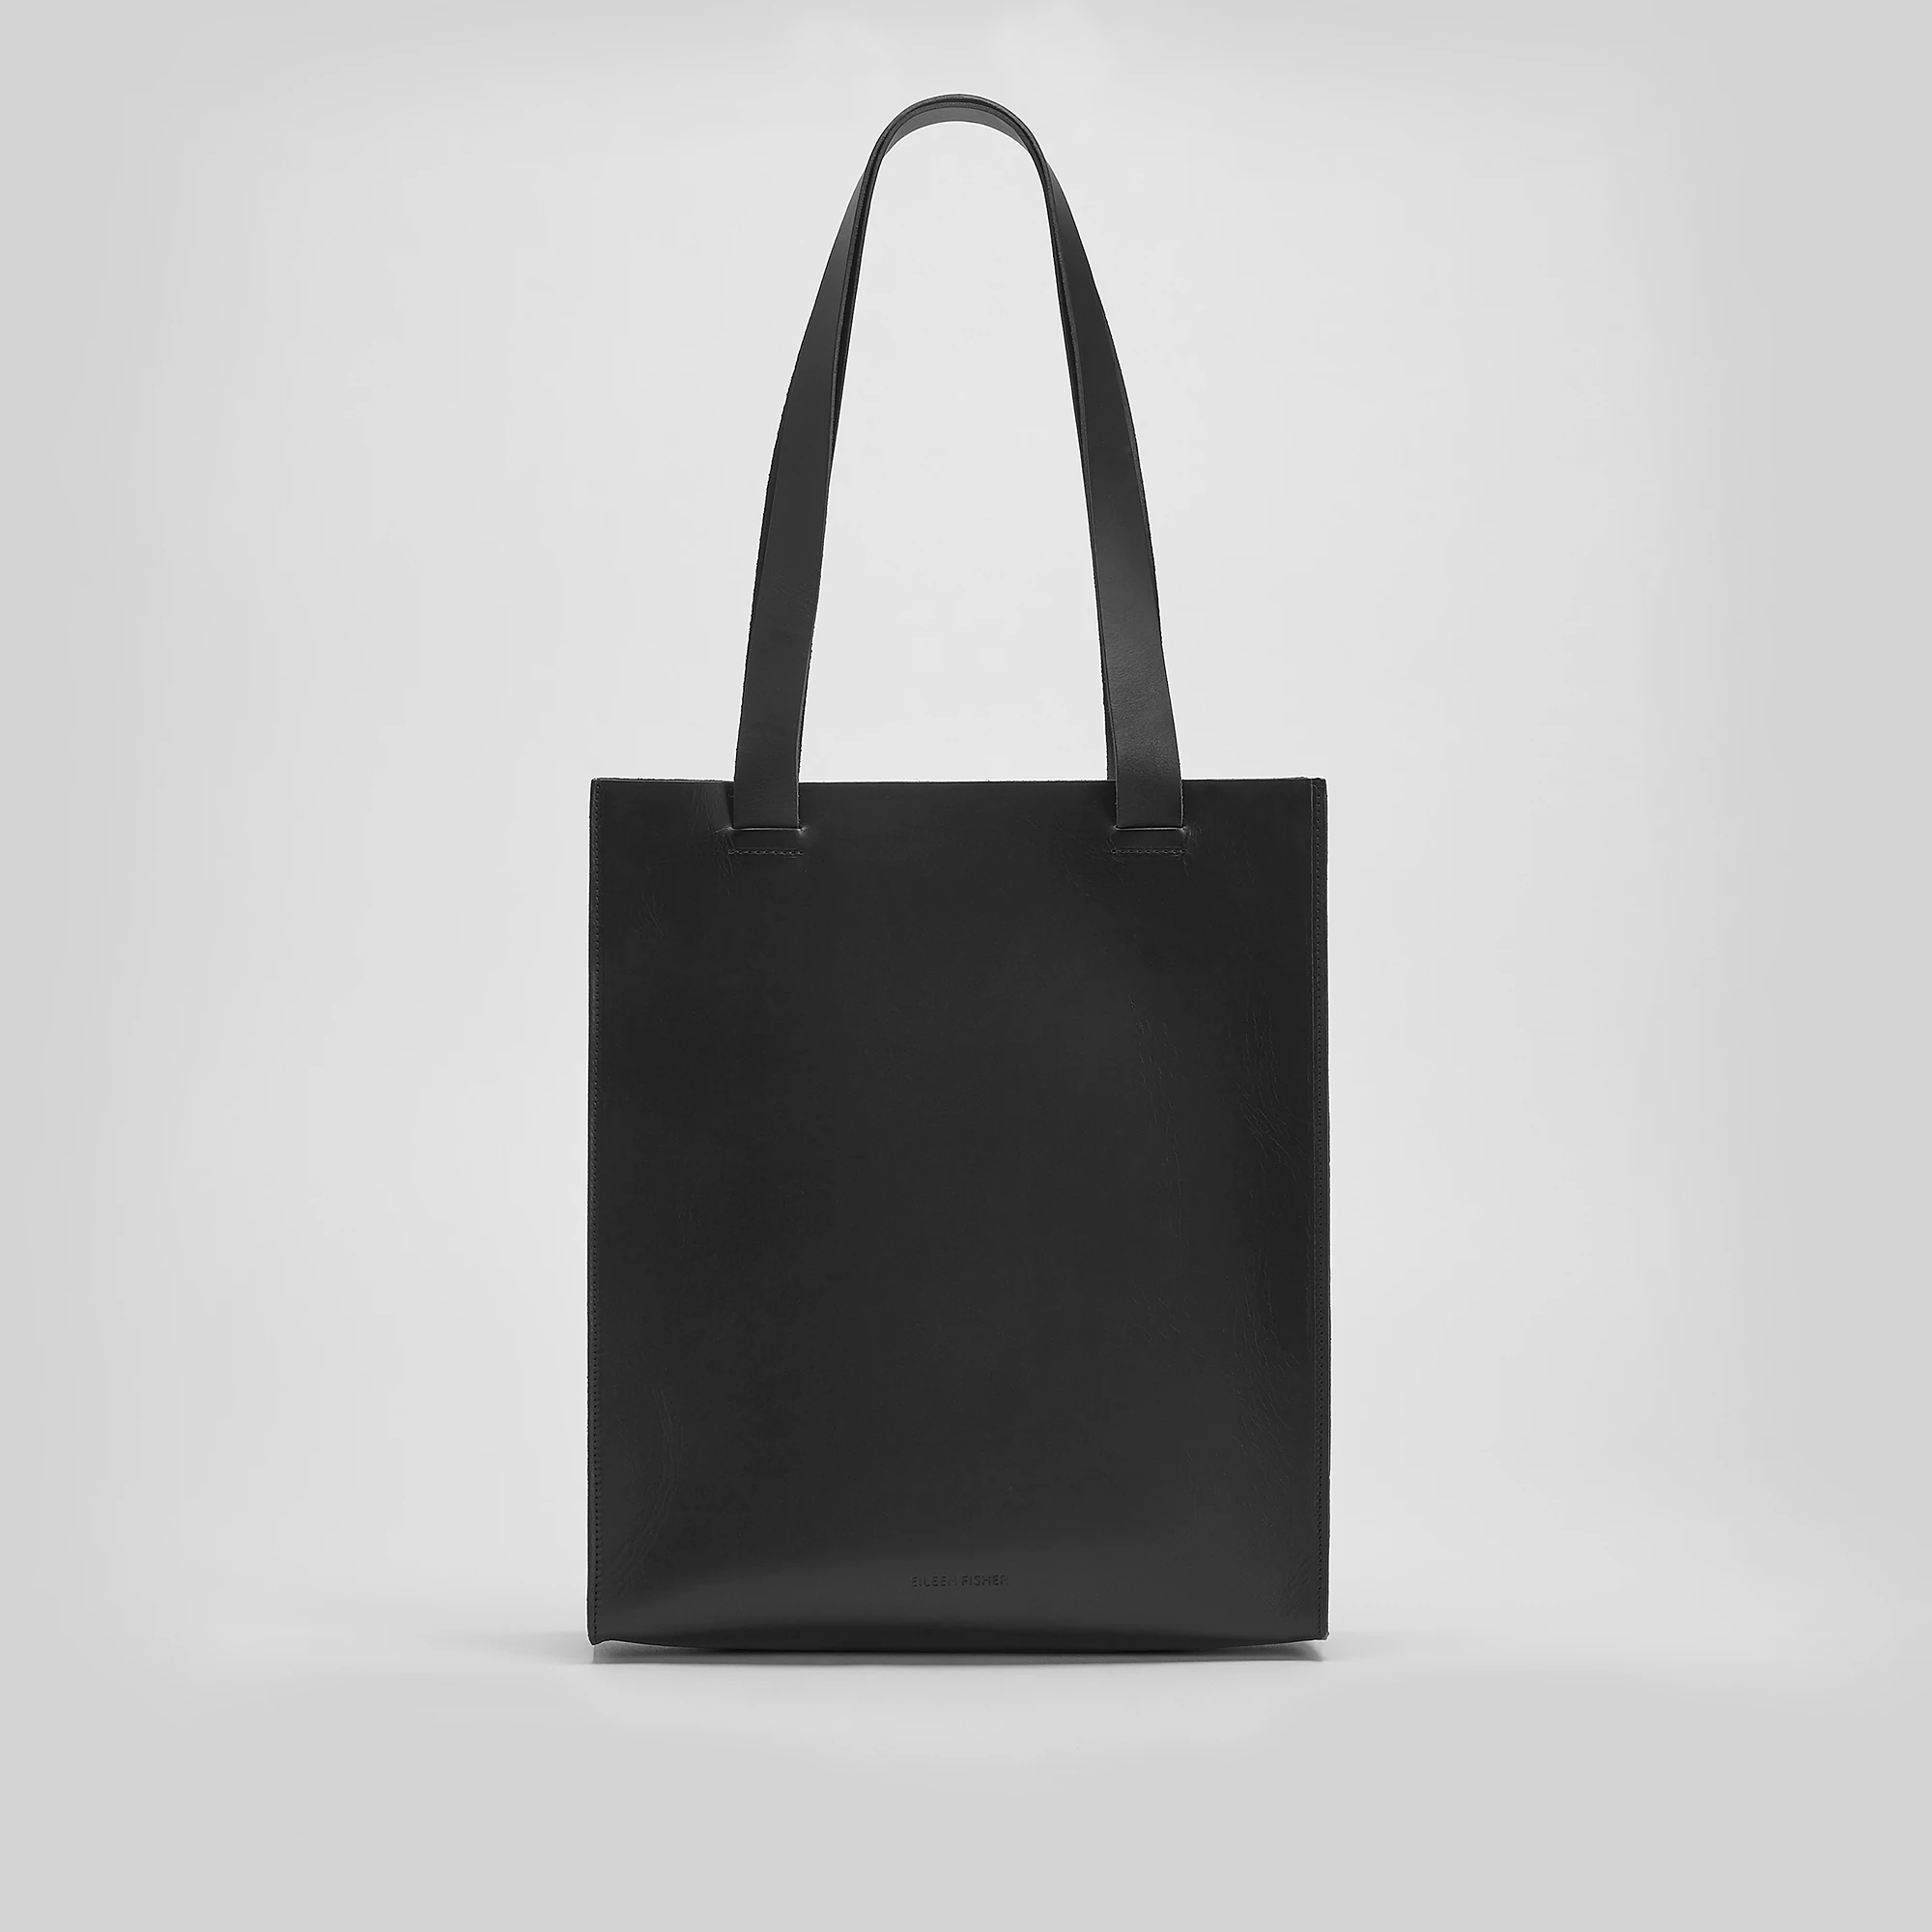 Vegetable Tanned Italian Leather Market Tote | EILEEN FISHER